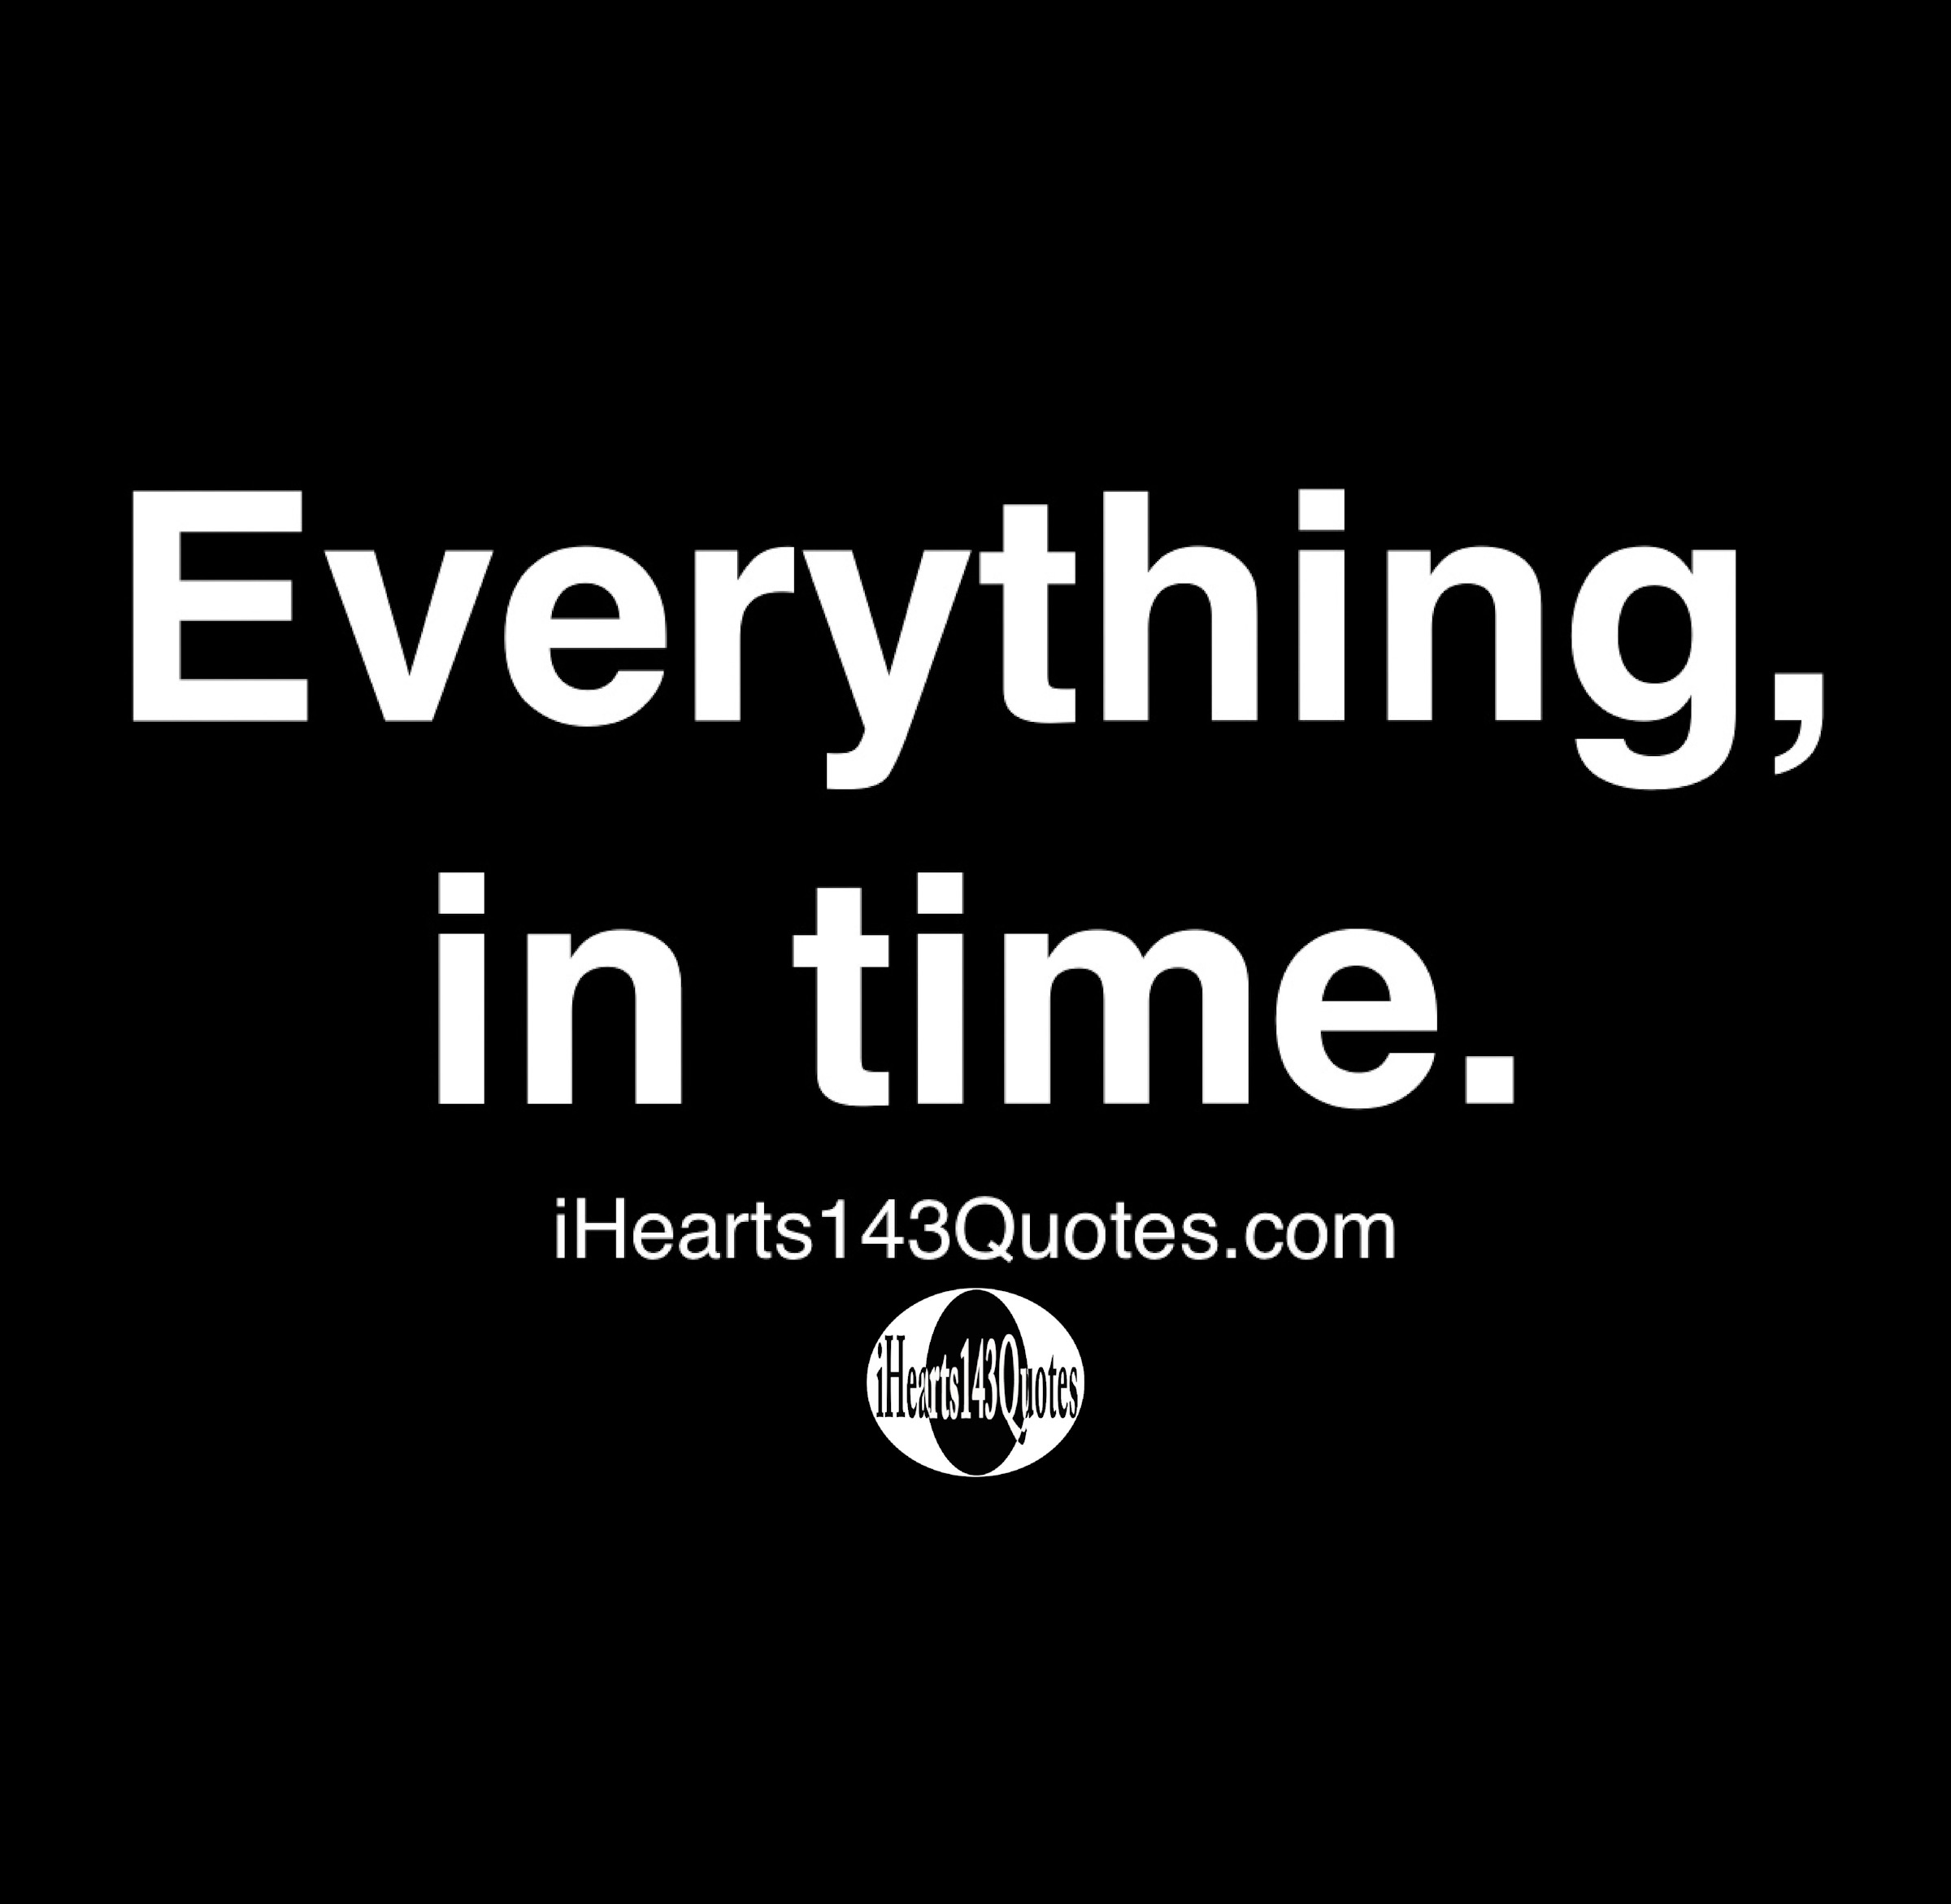 Everything, in time Quotes - iHearts143Quotes Hip News